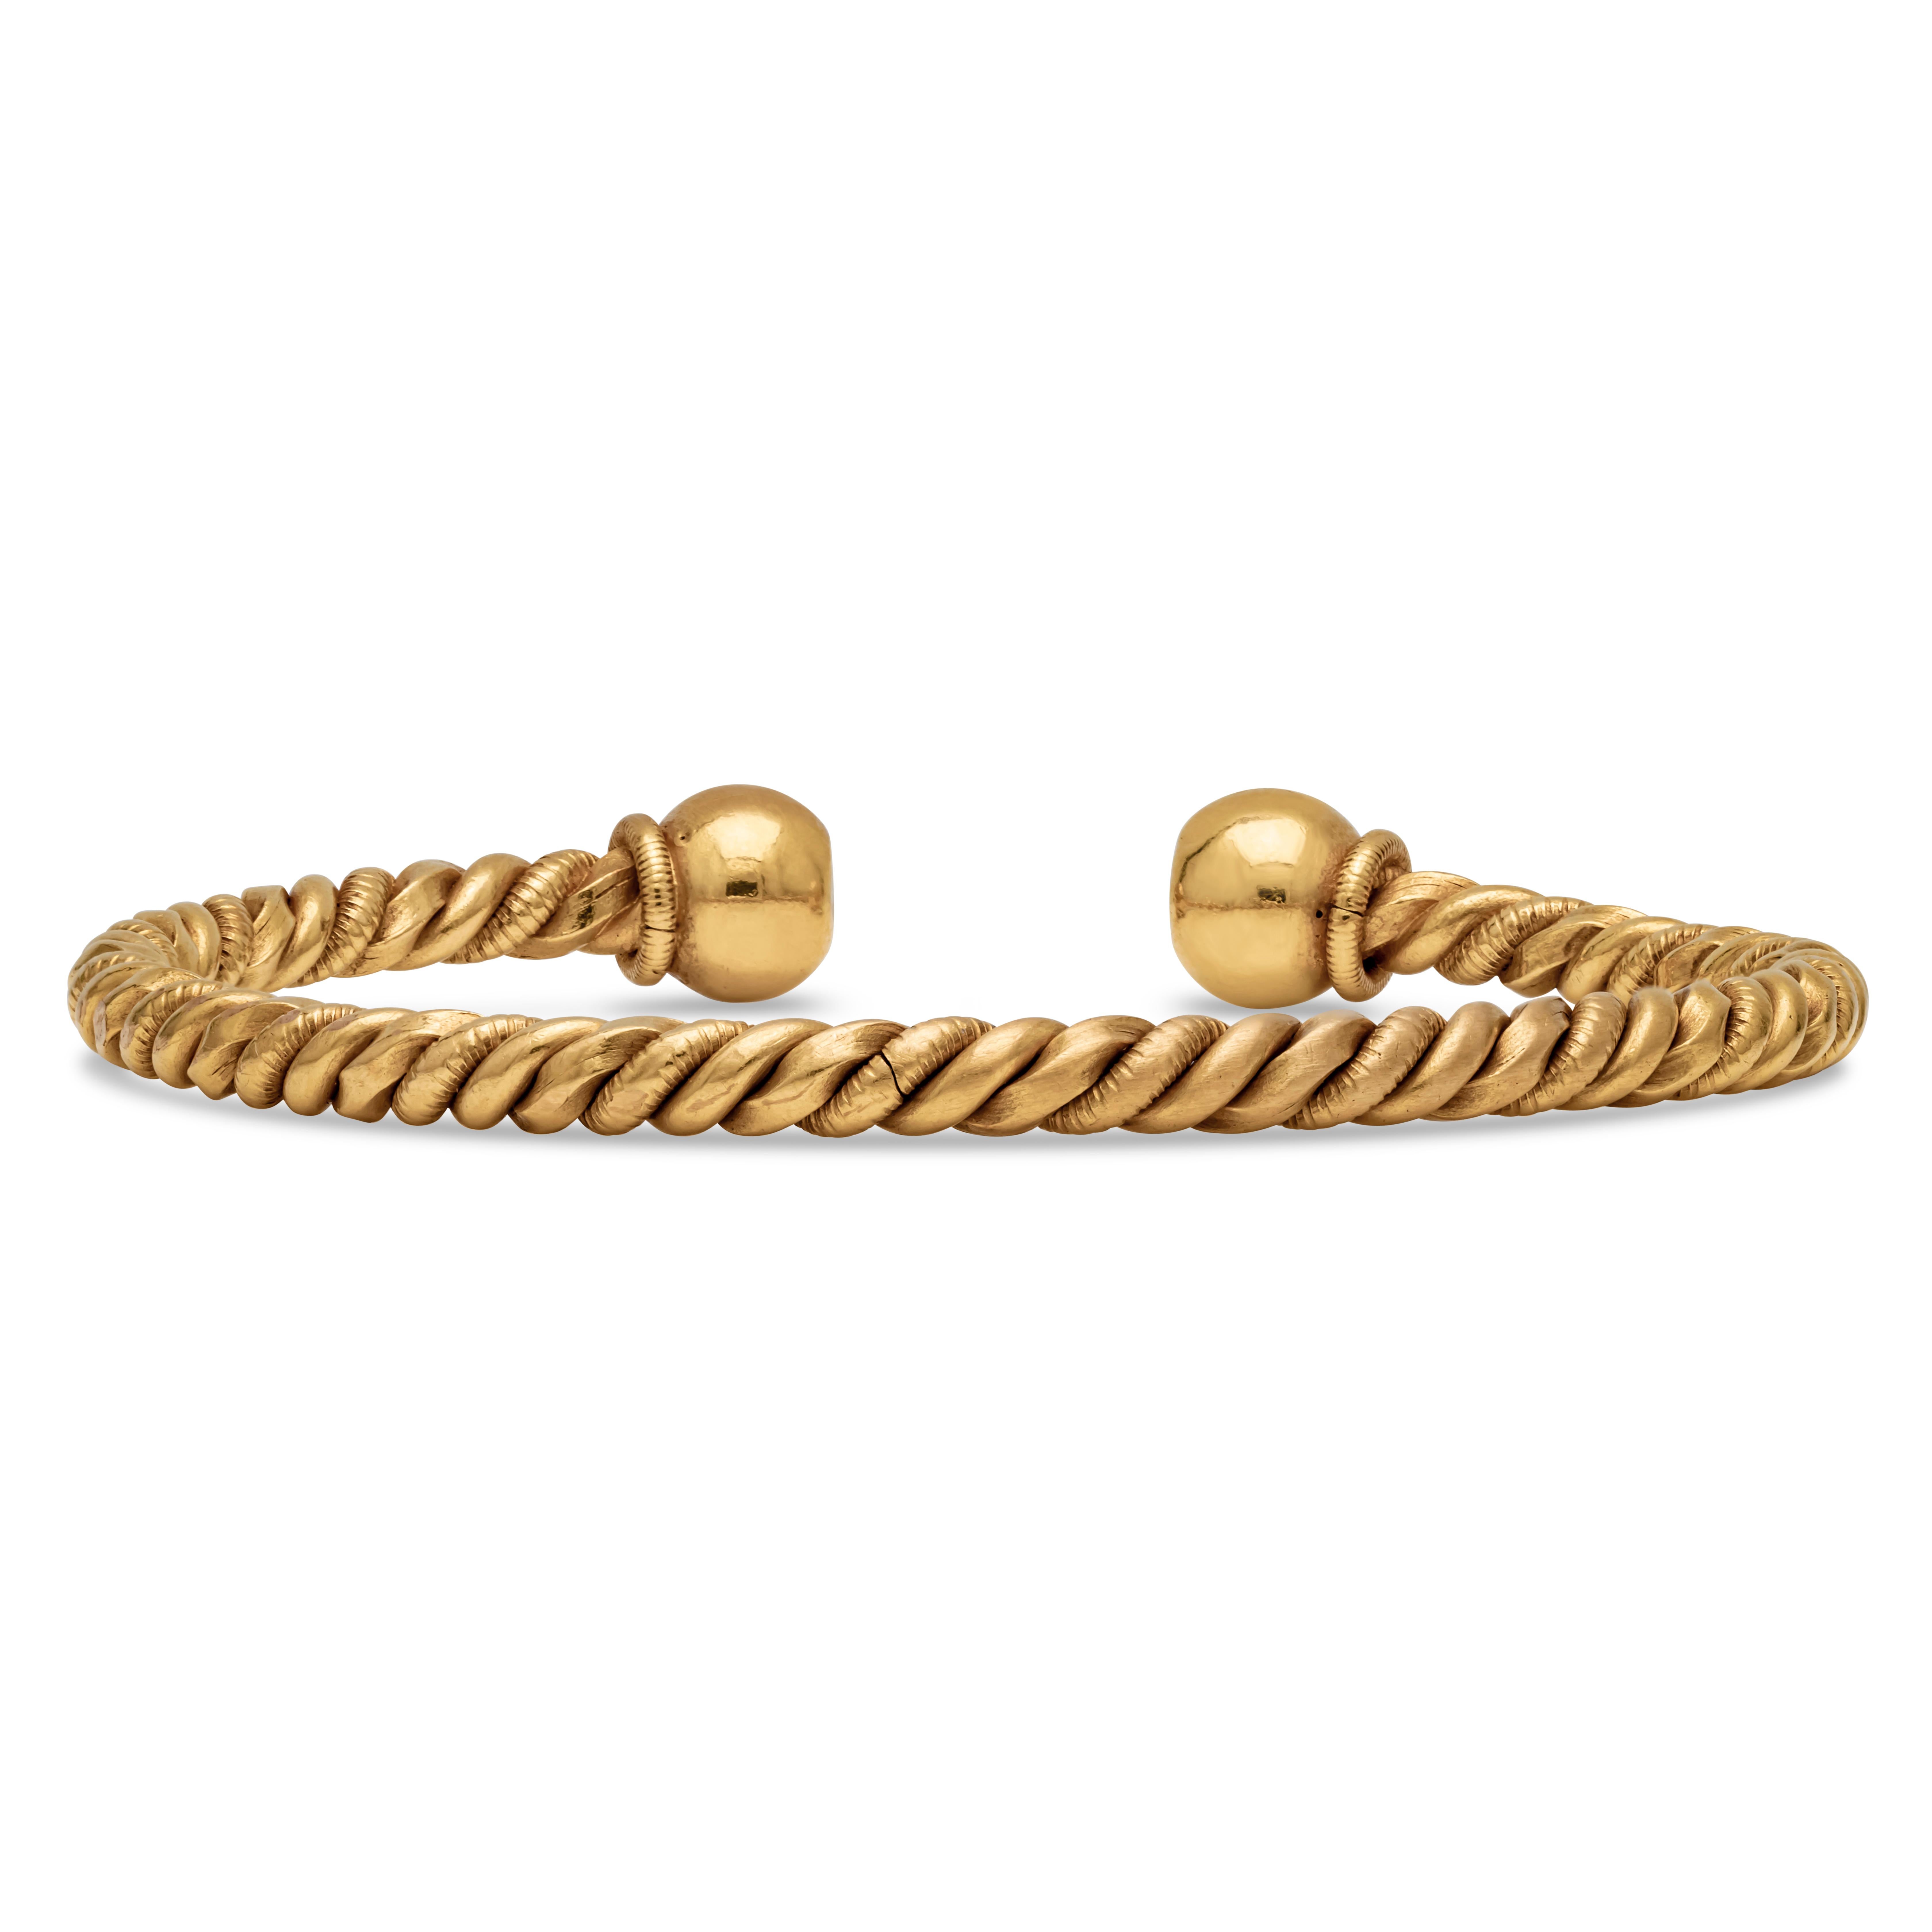 Showcasing an exquisite and attractive antique bangle bracelet set in a 20K Yellow Gold braided hand-made bangle design. 7.5 inches in length and 4.70 mm in width.

